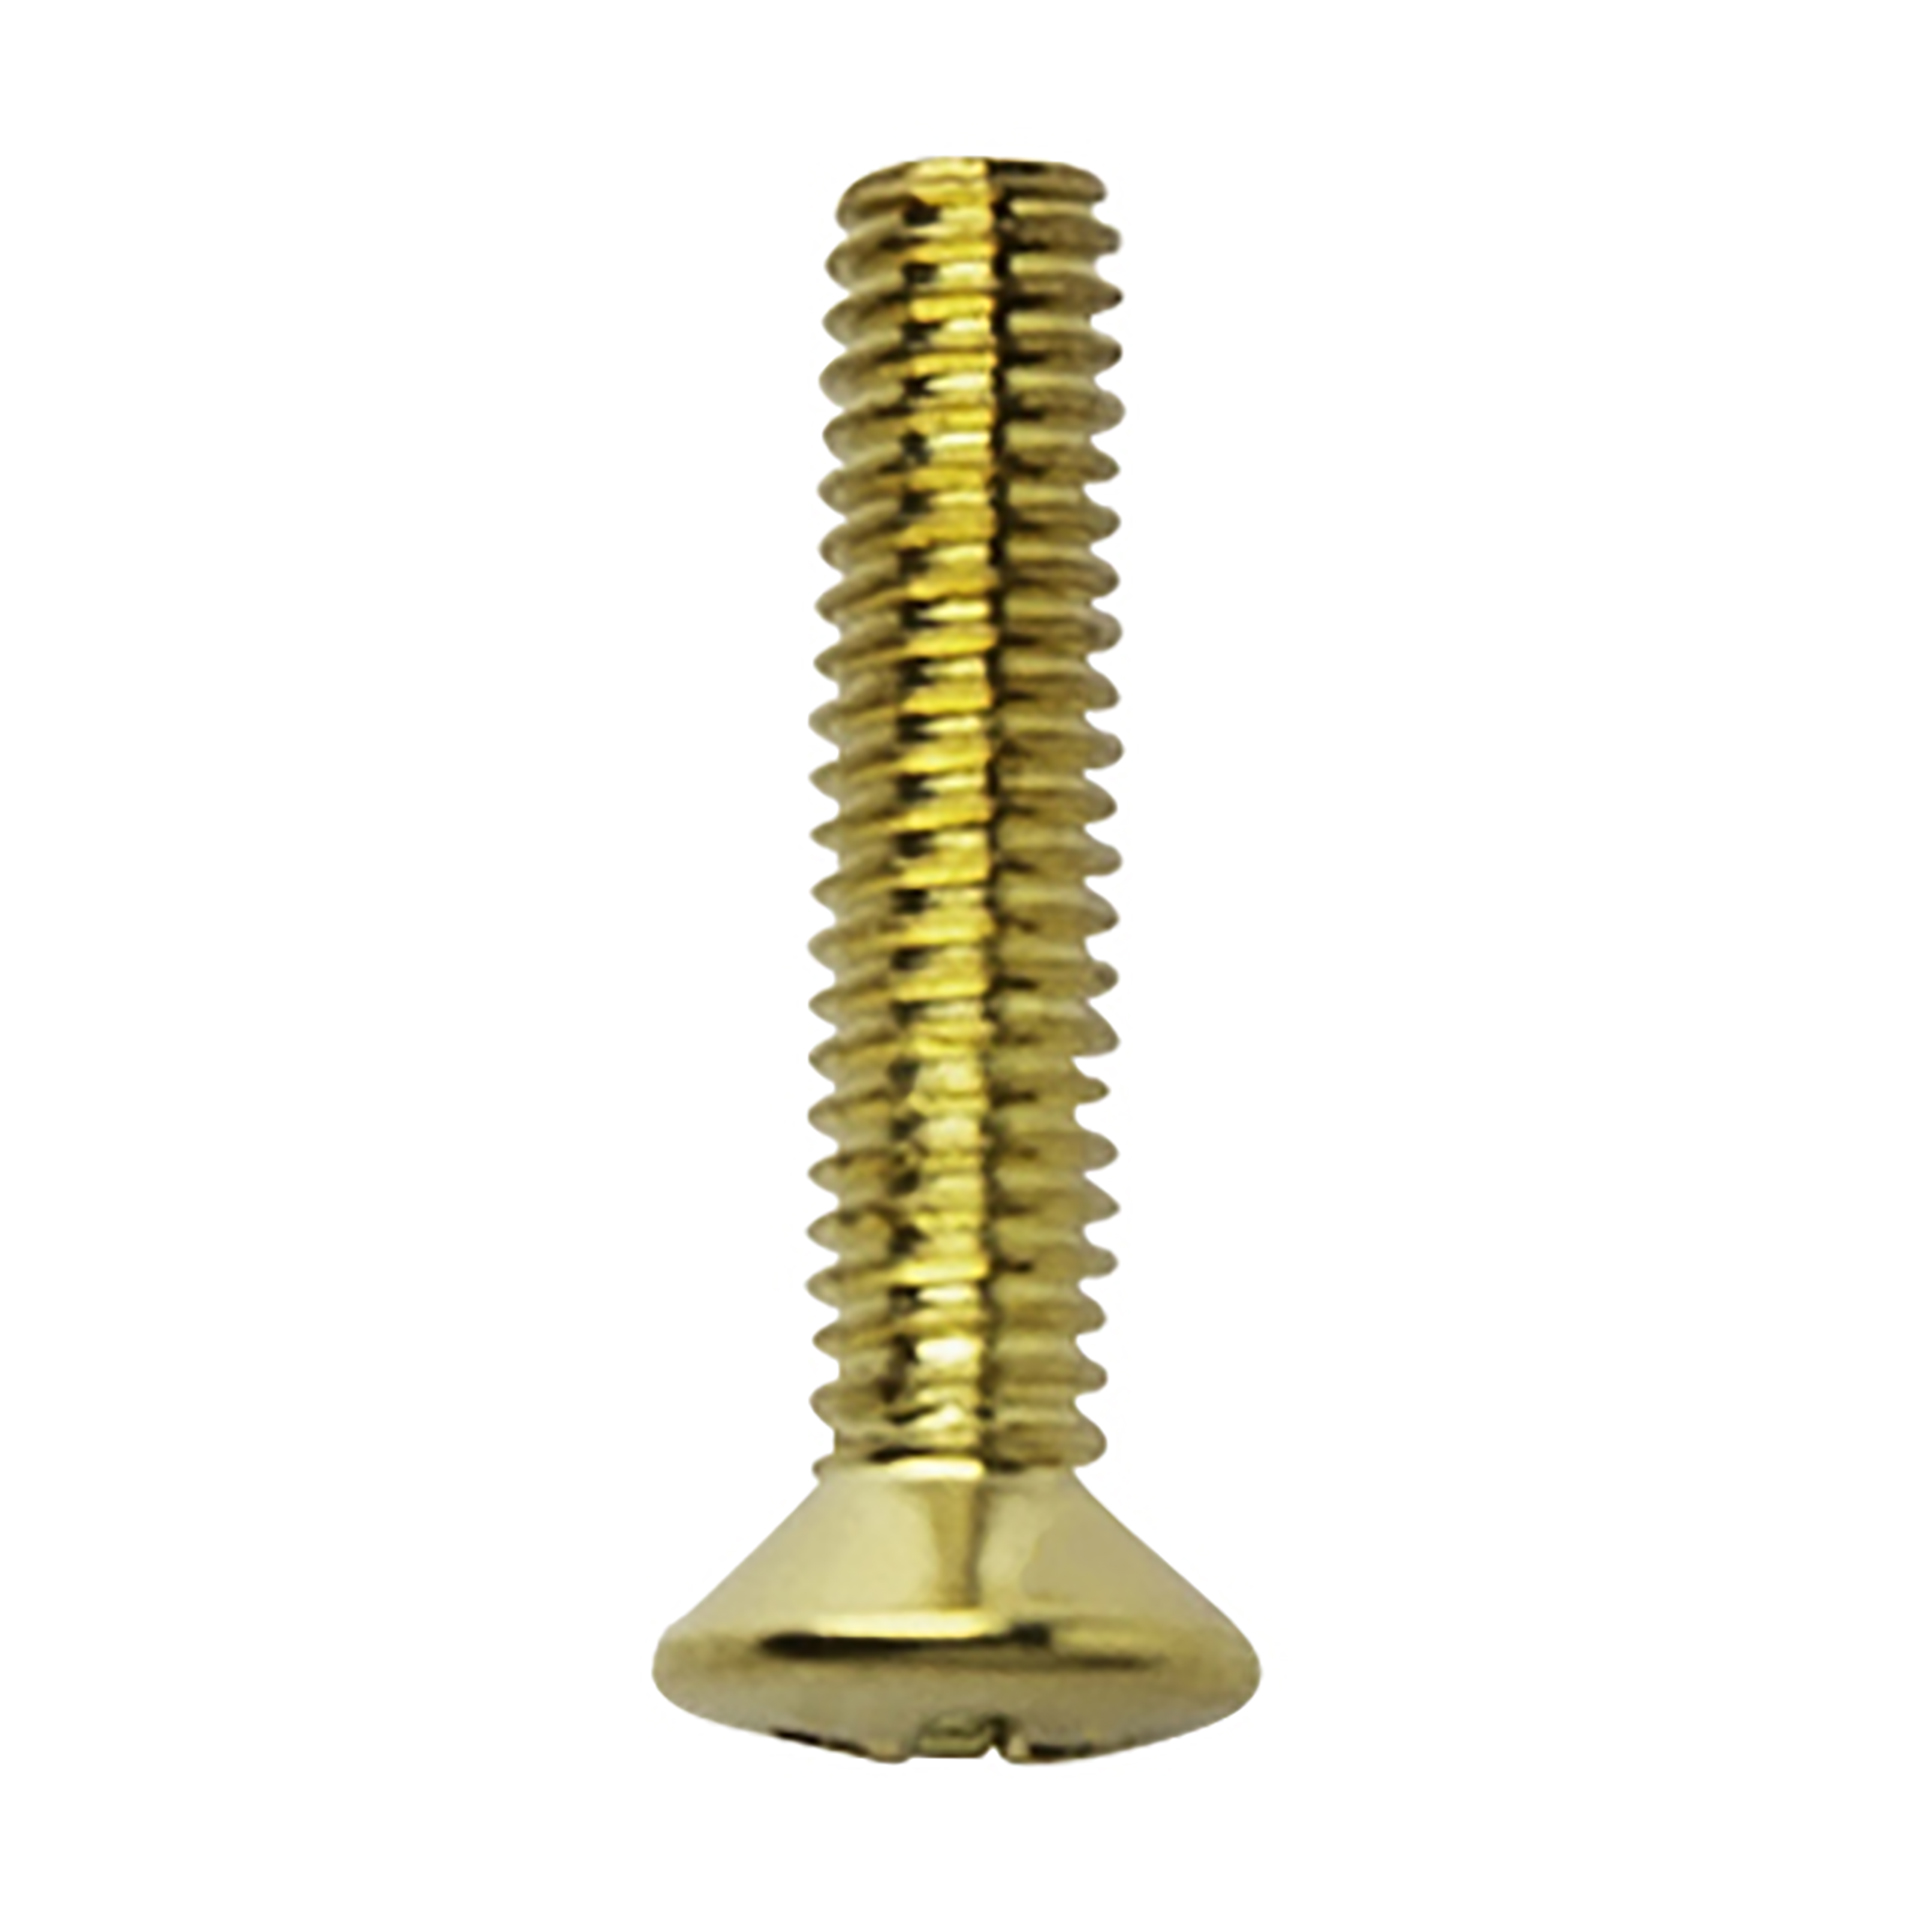 Sadowsky Parts - Countersunk Screw for Electronics Compartment Covers, M 2,5 mm x 12 mm, 4 pcs. - Gold